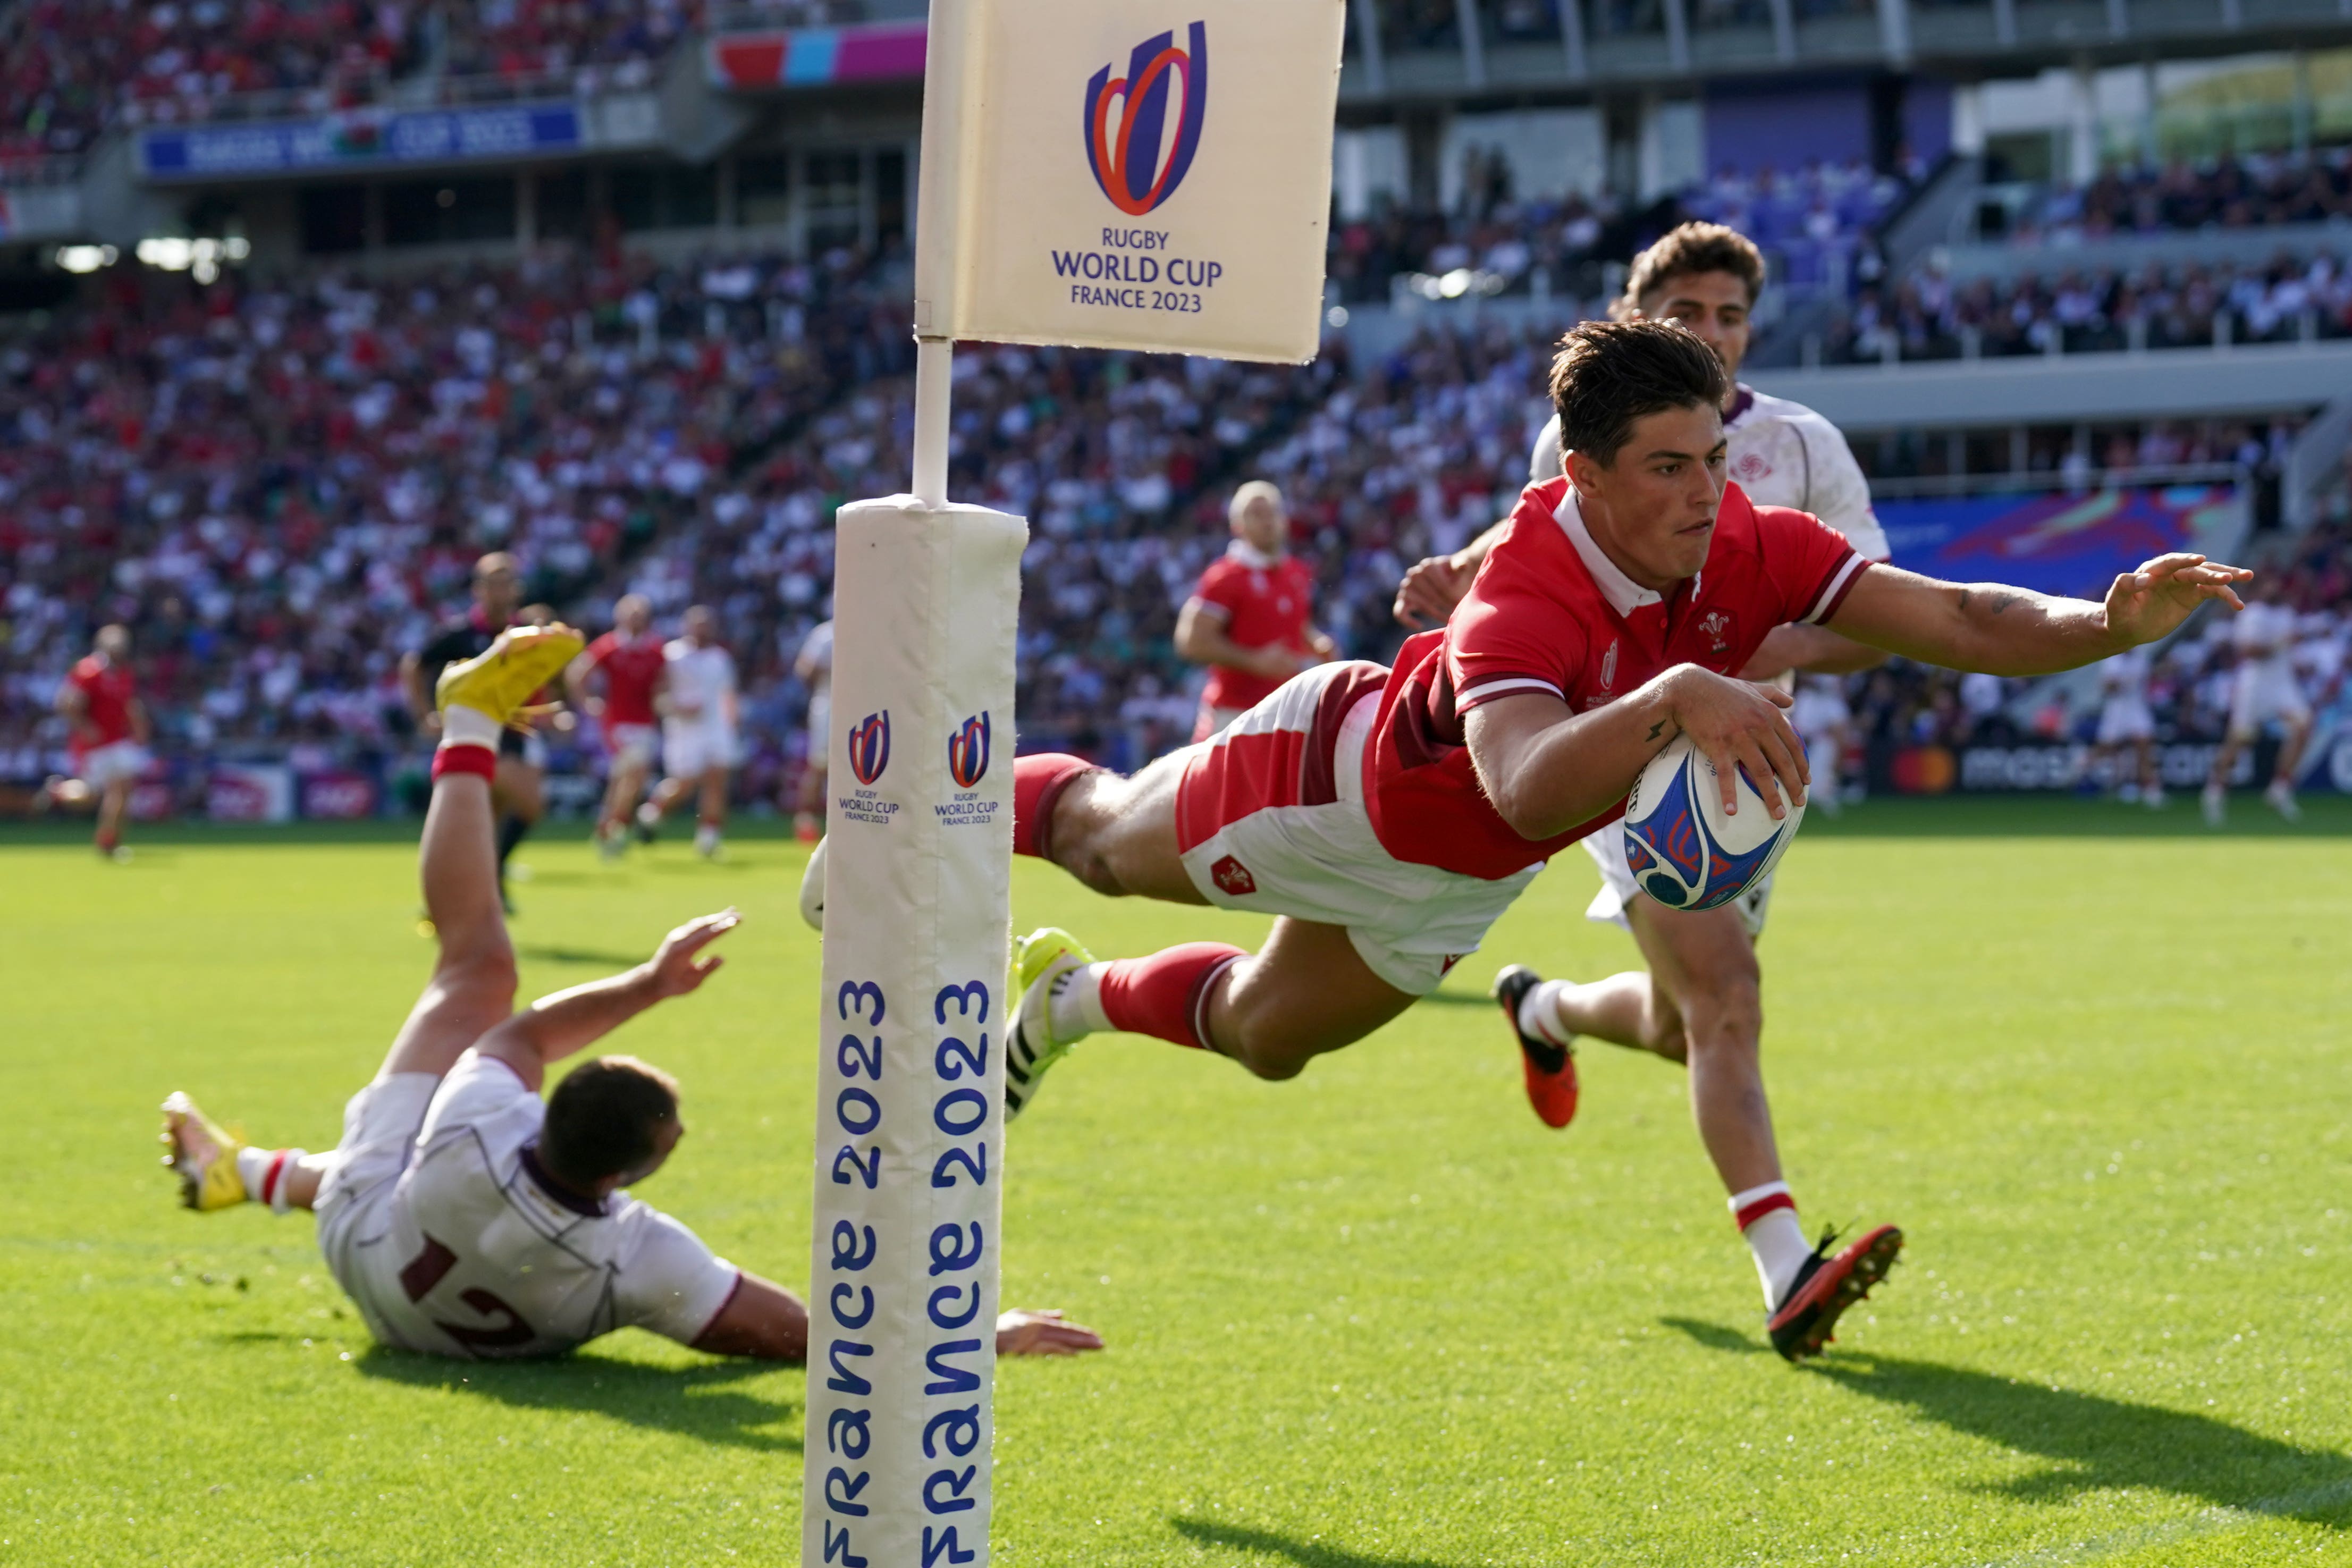 Wales wing Louis Rees-Zammit has scored five tries in the Rugby World Cup (David Davies/PA)